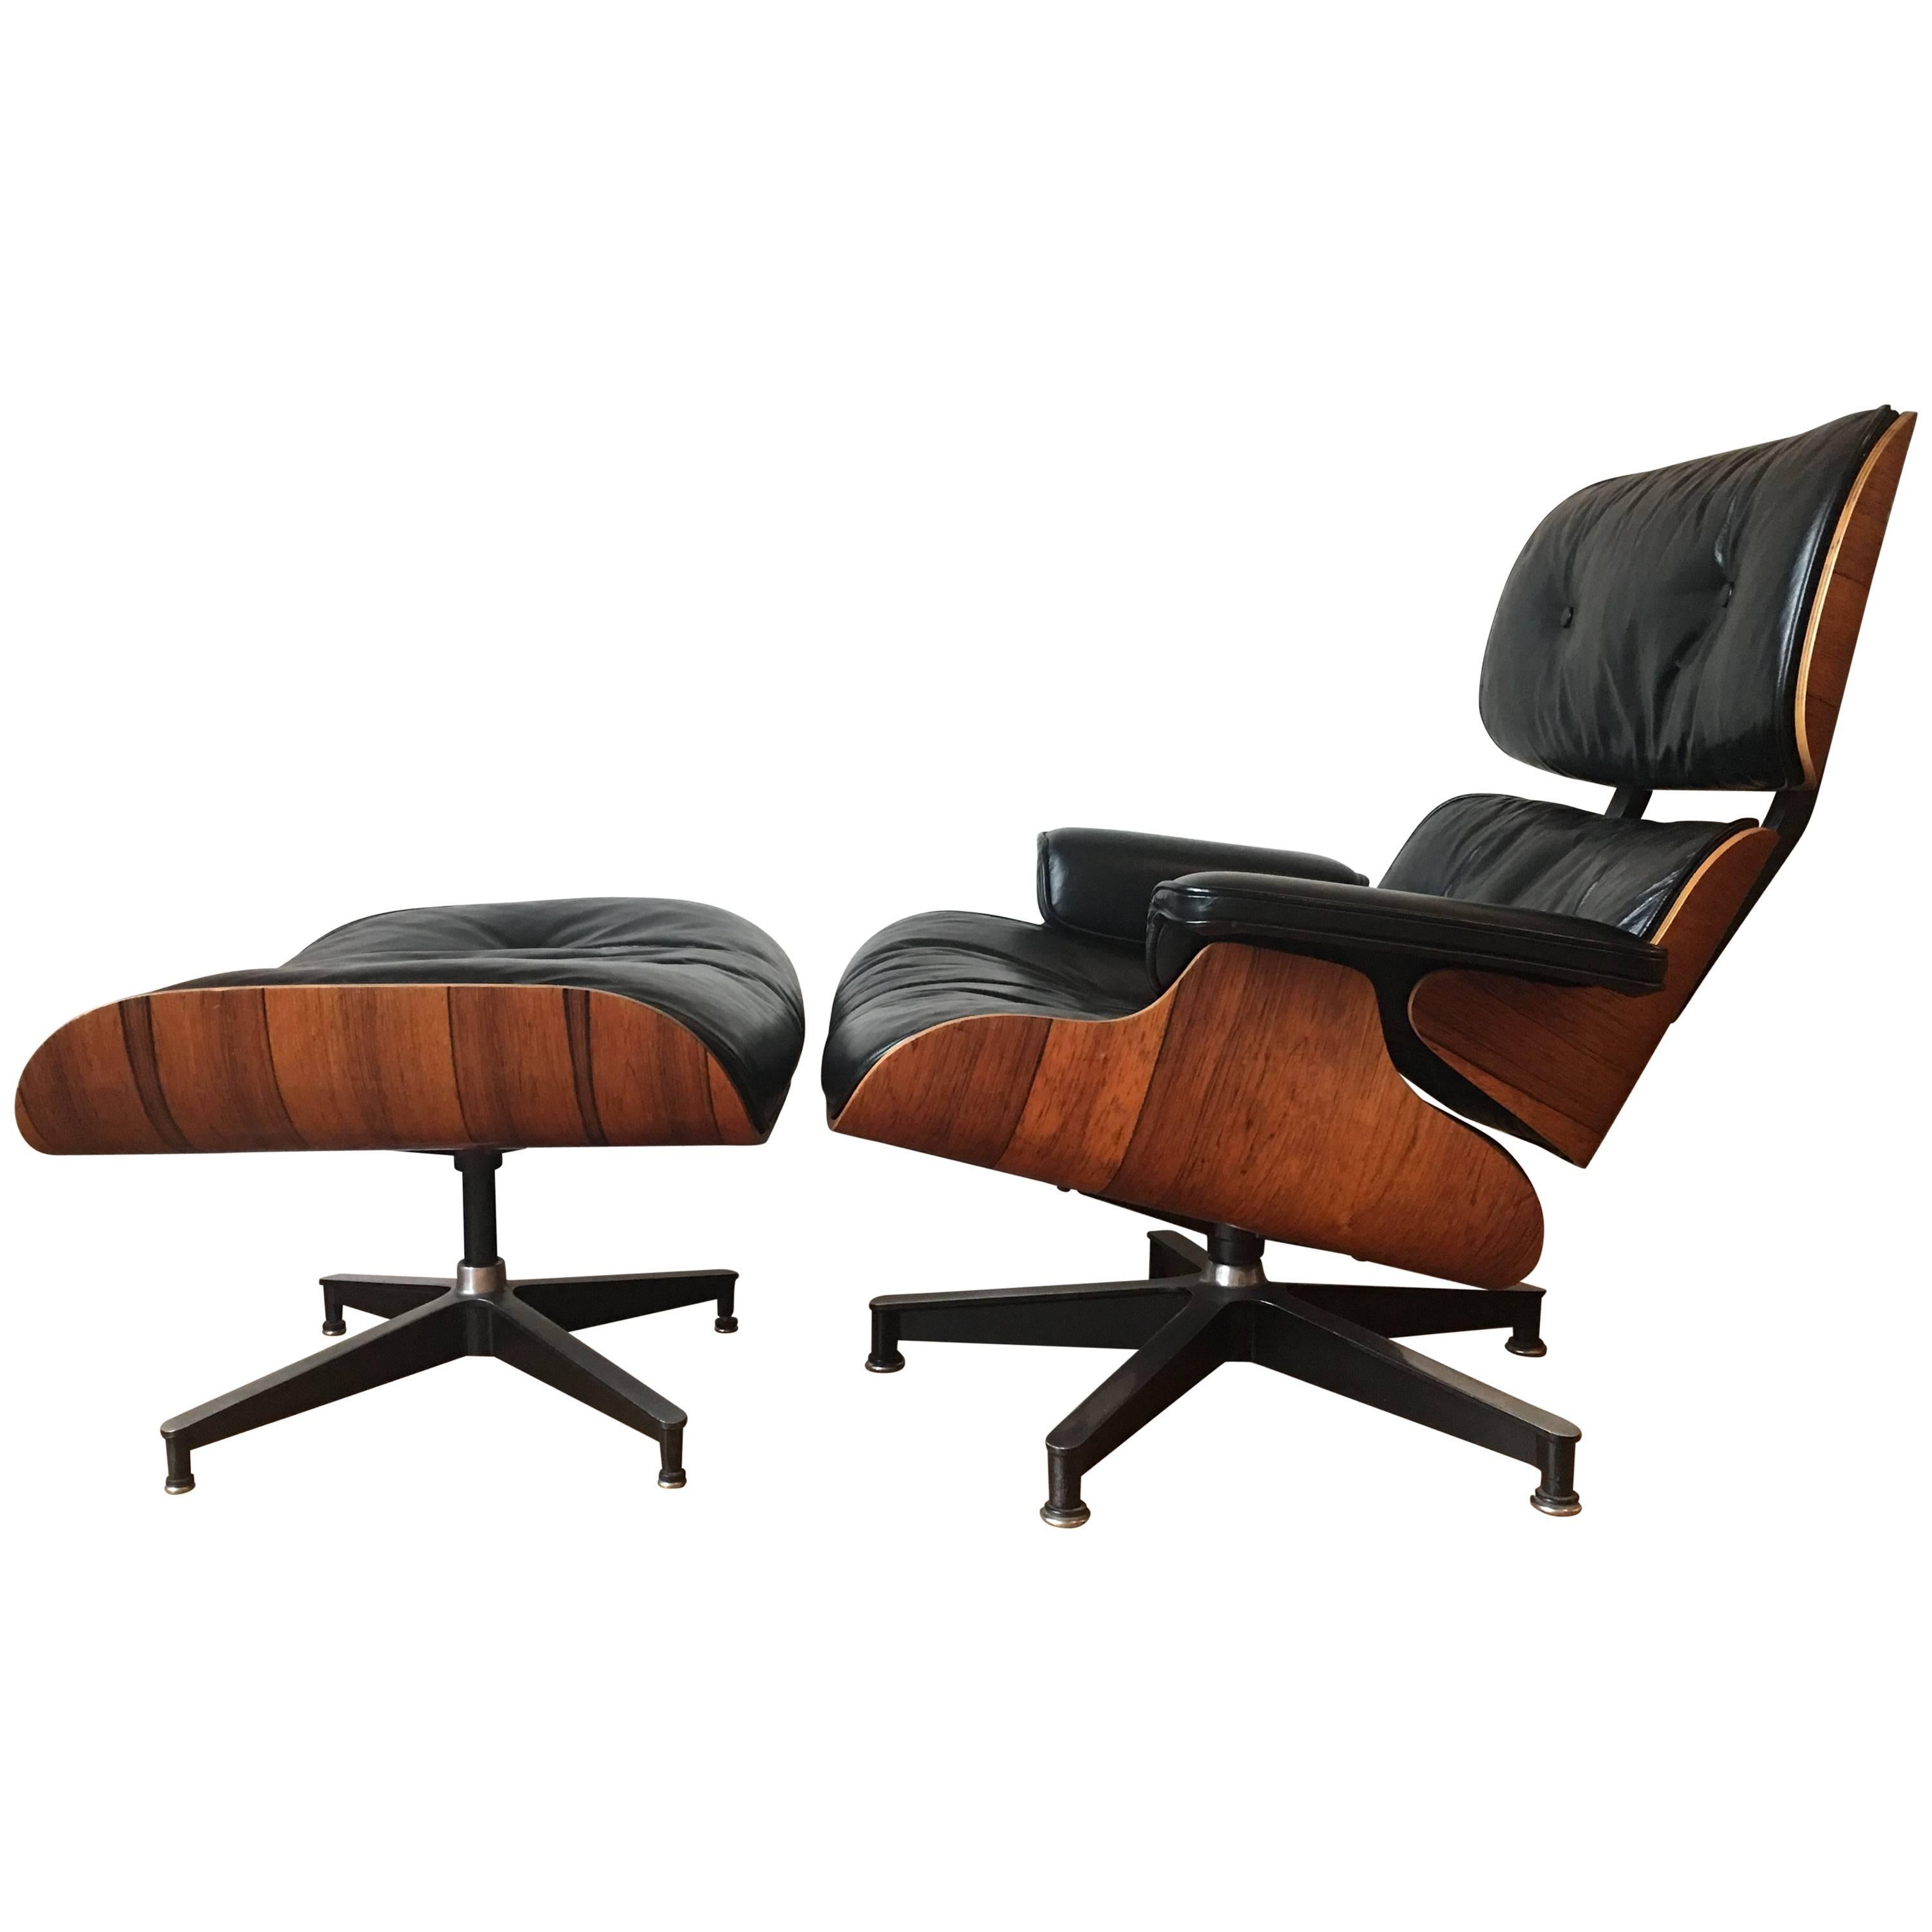 Near Mint Condition 1960s Herman Miller Eames Lounge Chair and Ottoman